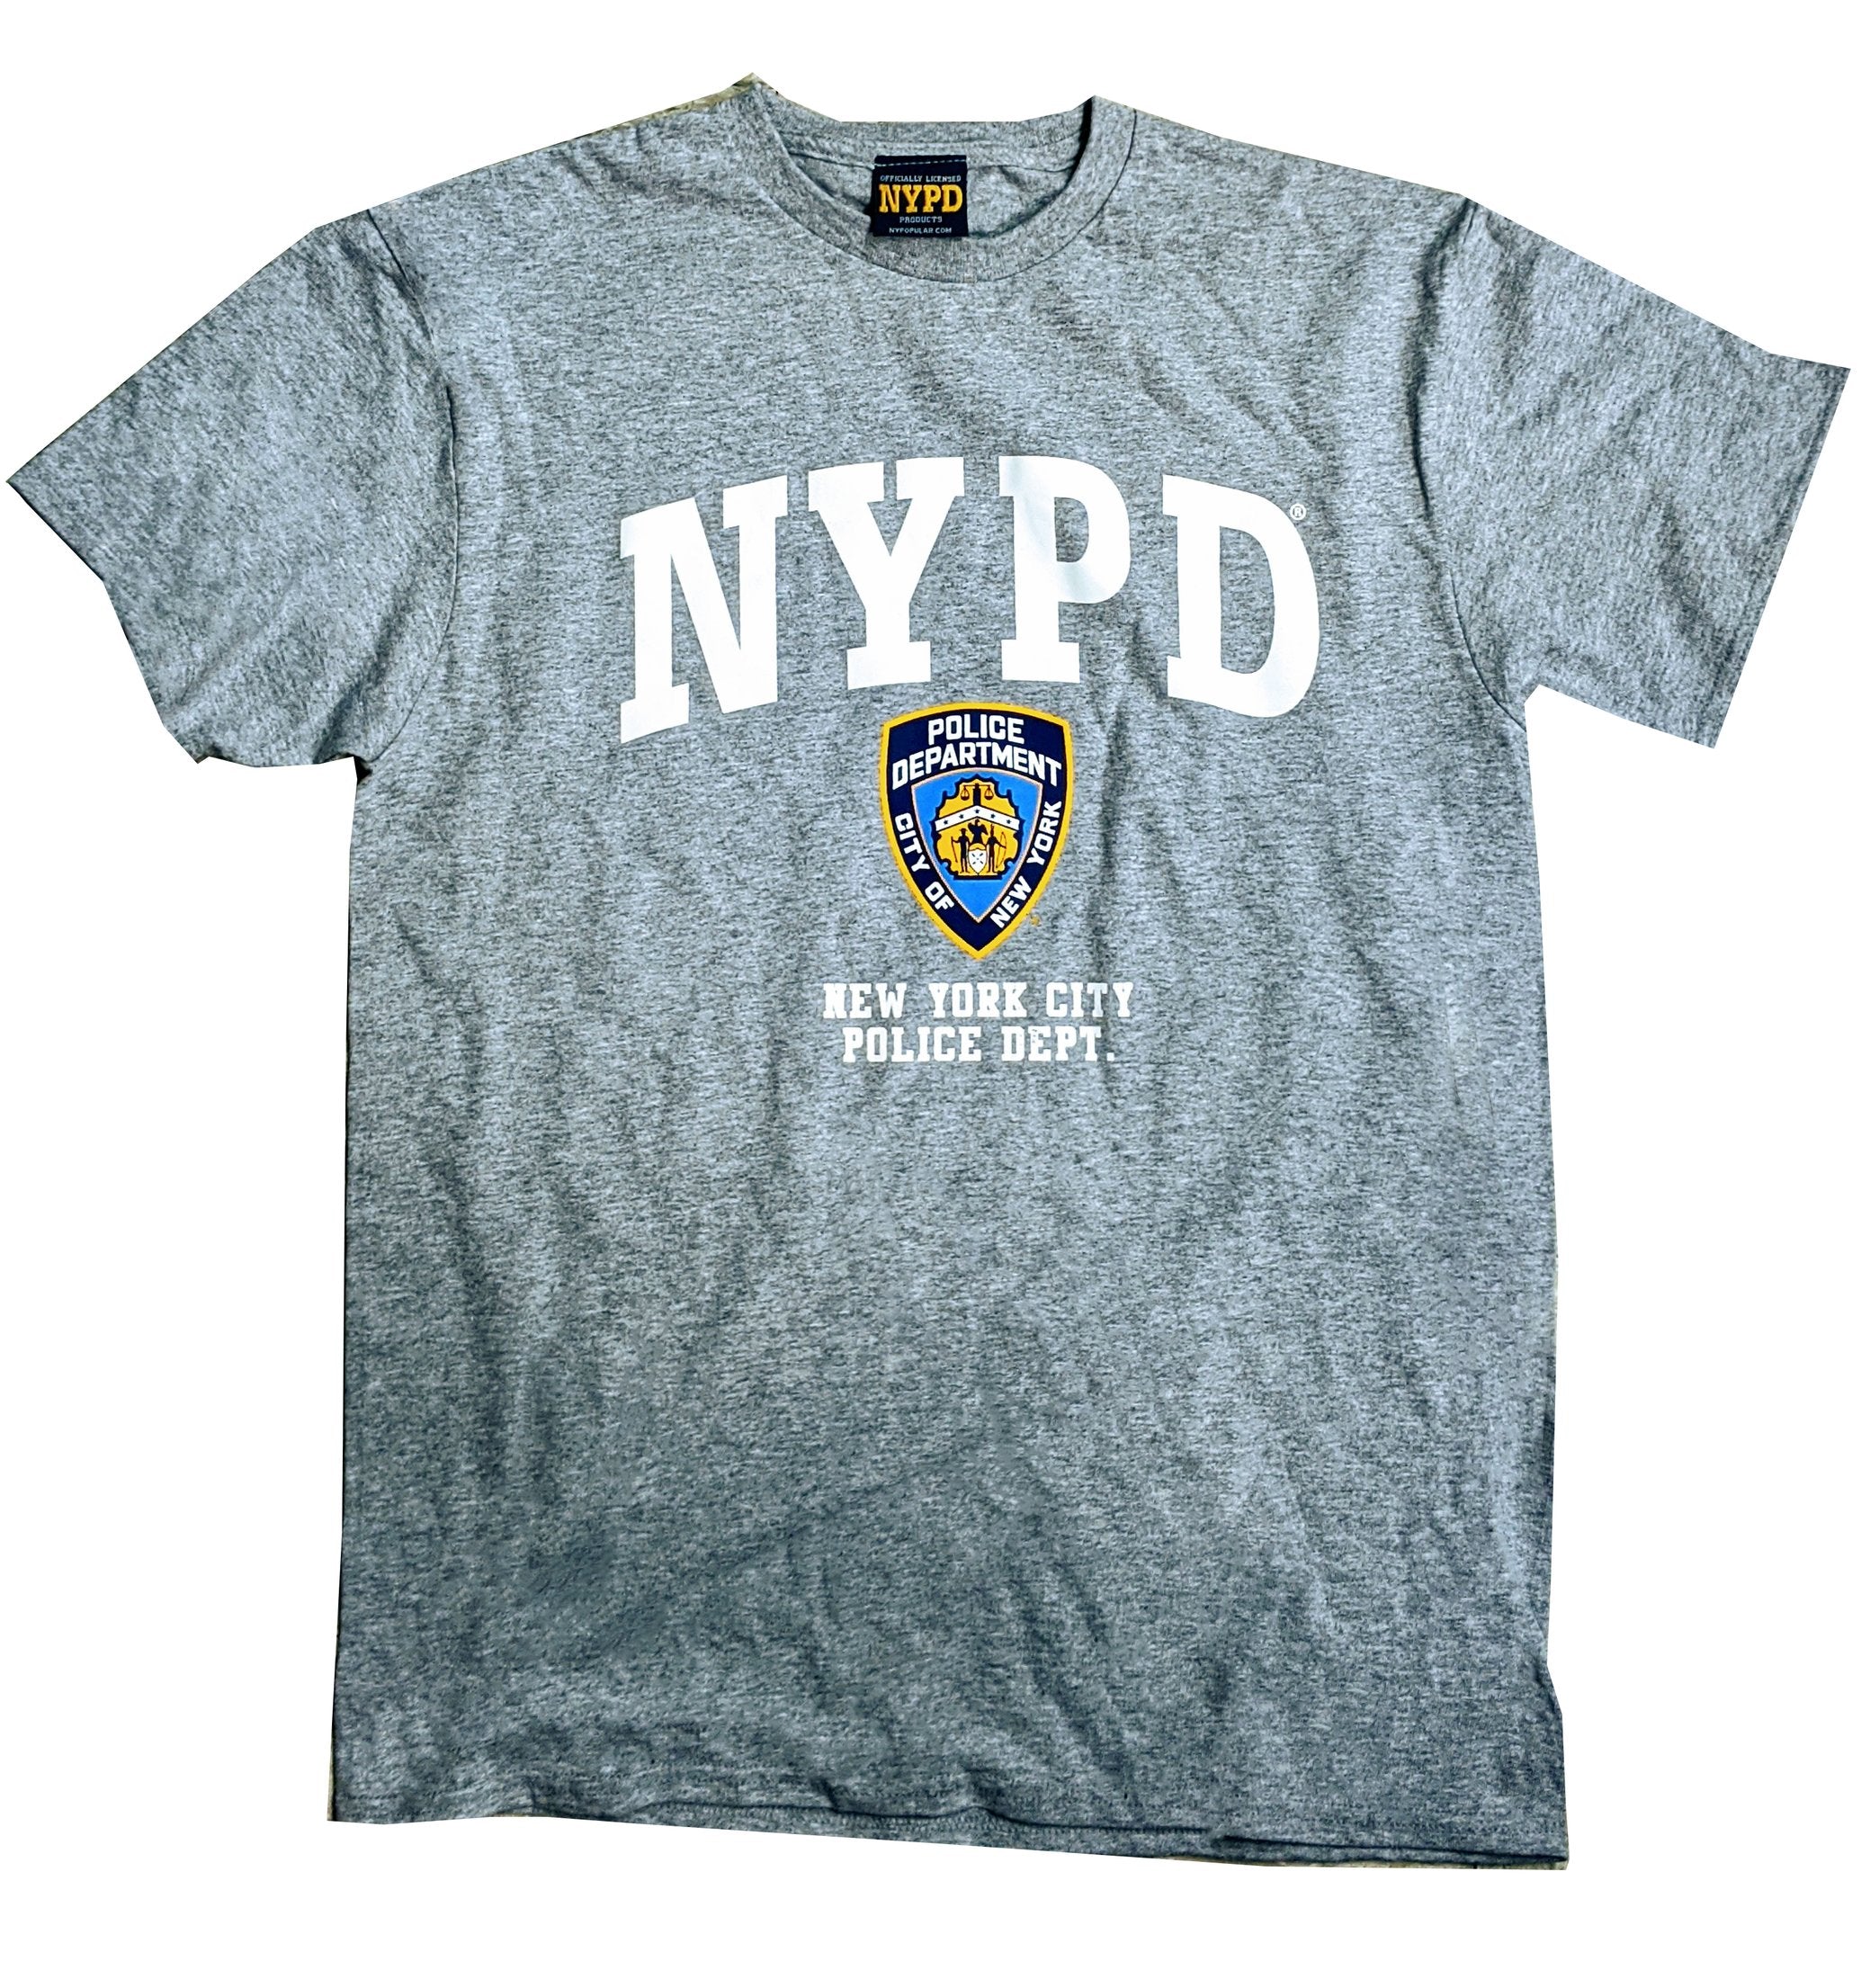 Offical NYPD T-Shirt Men's Heather Gray Tee New York City Police